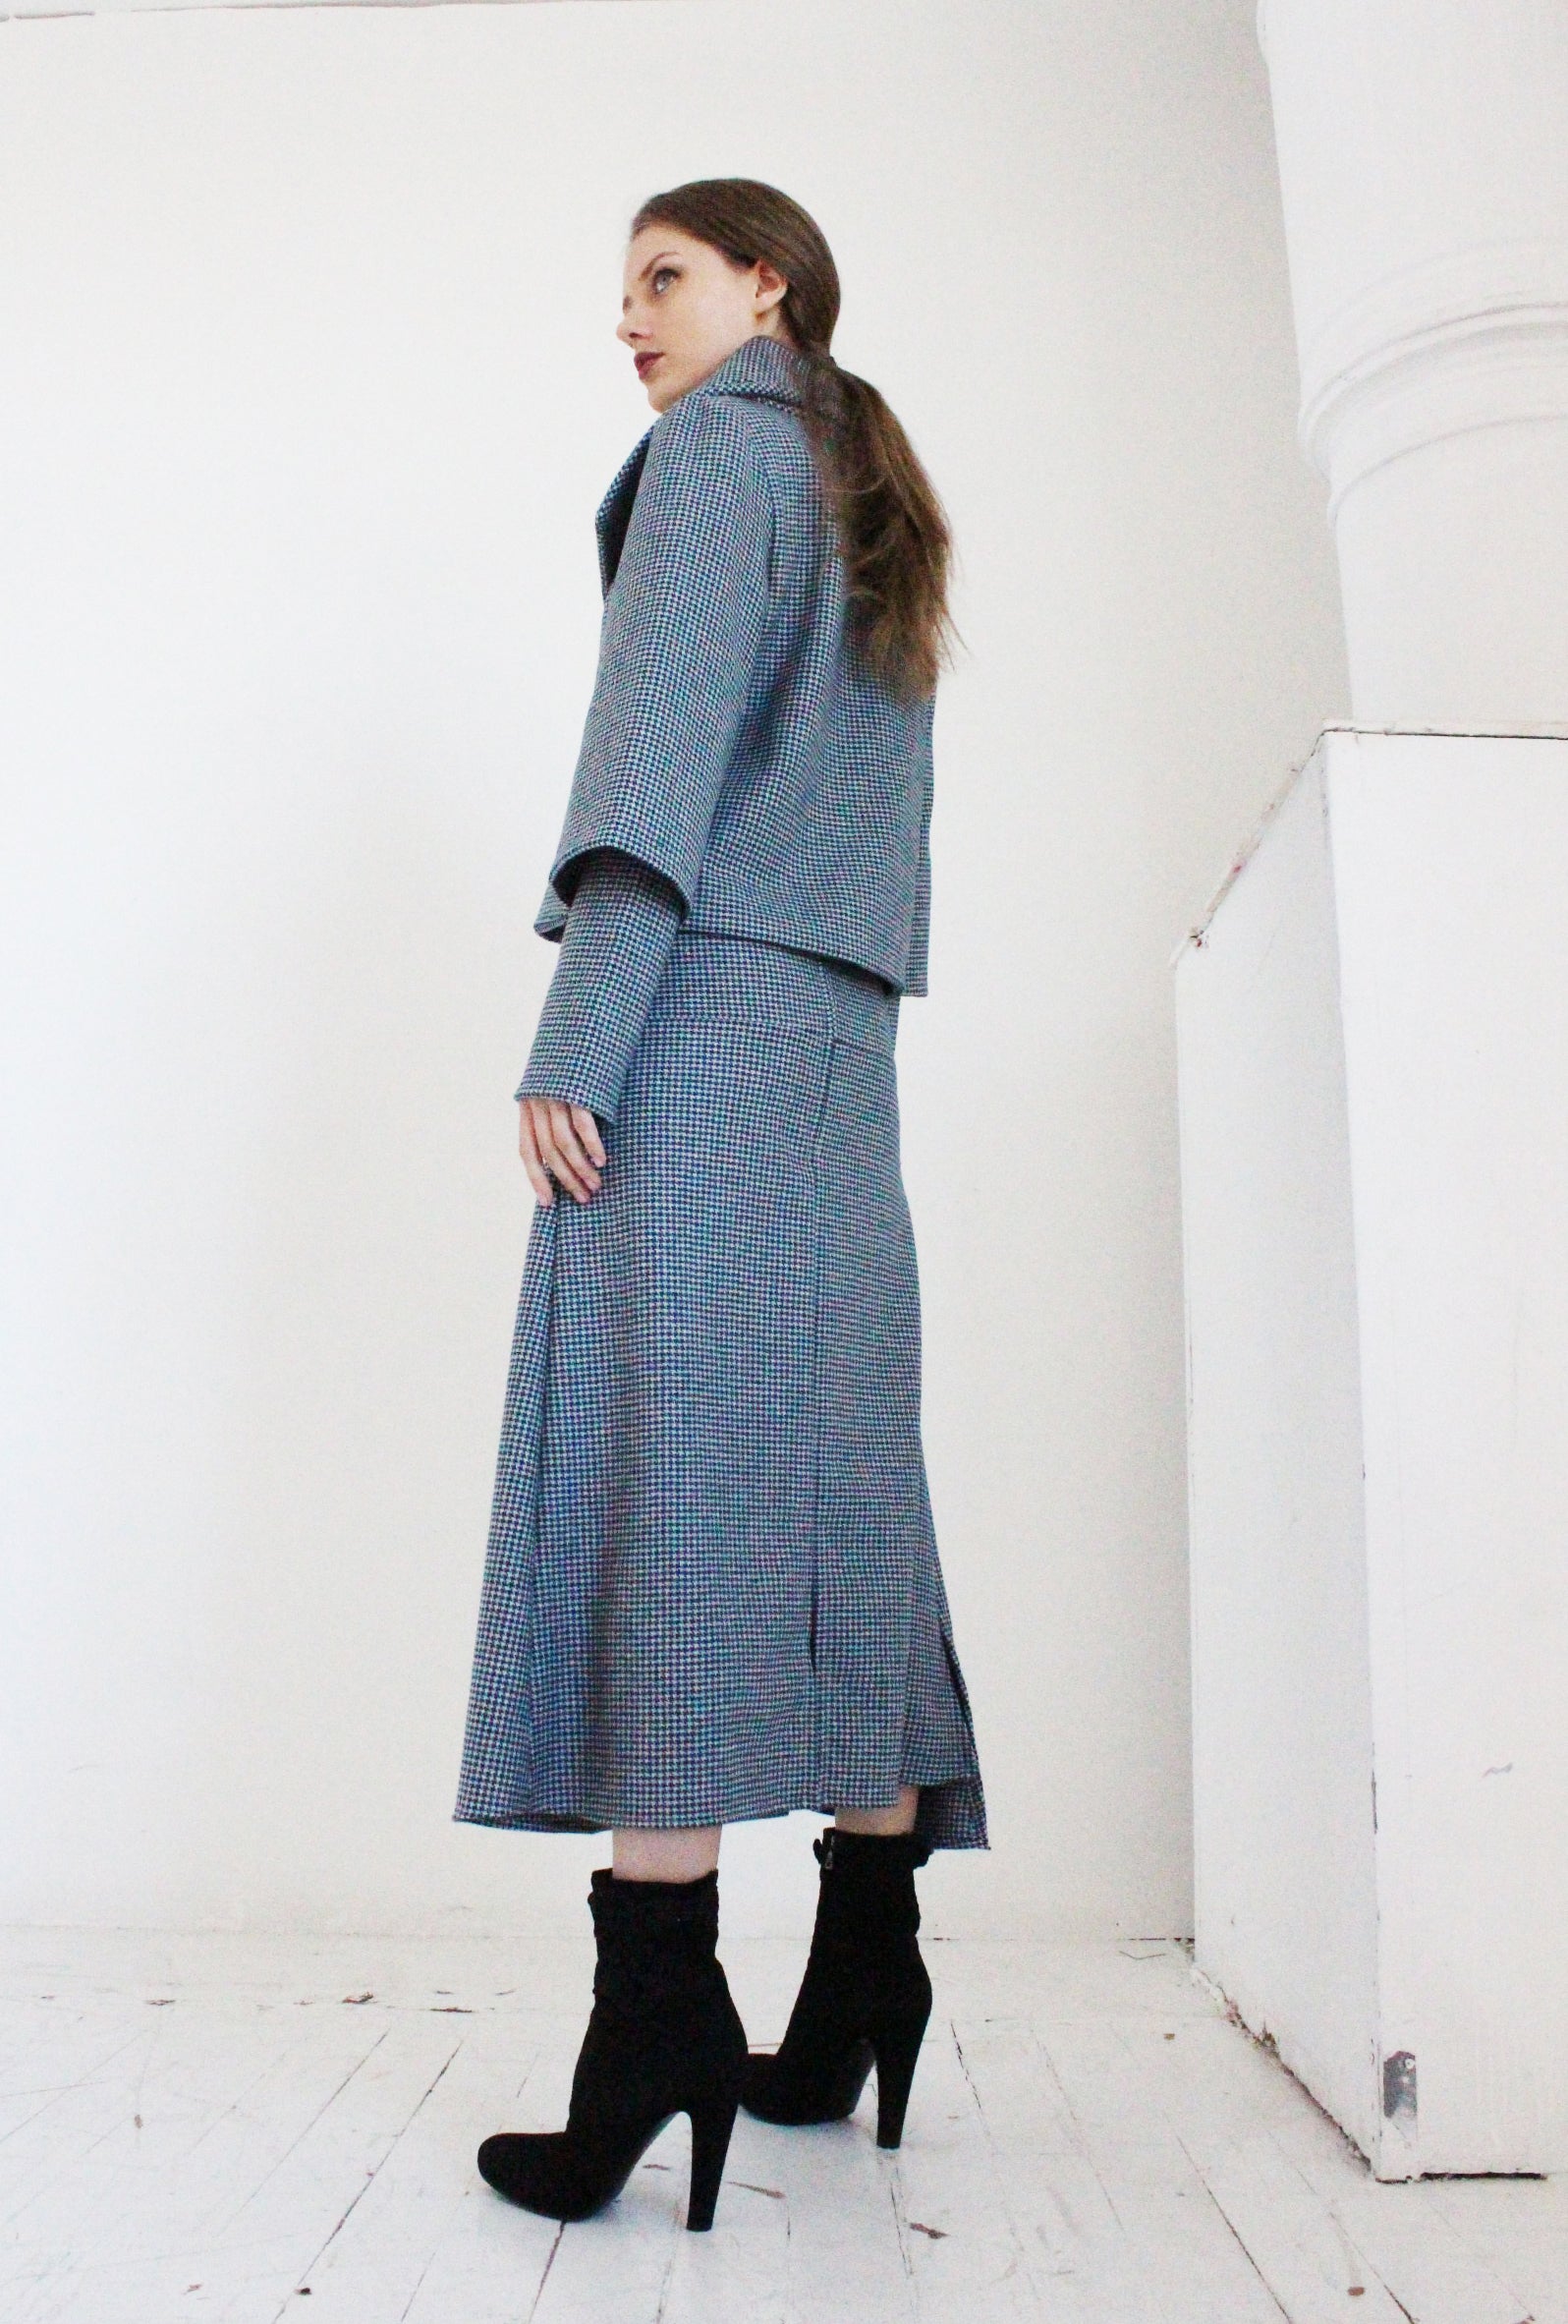 Ying Cai _ AW 21 Look 2 - 9